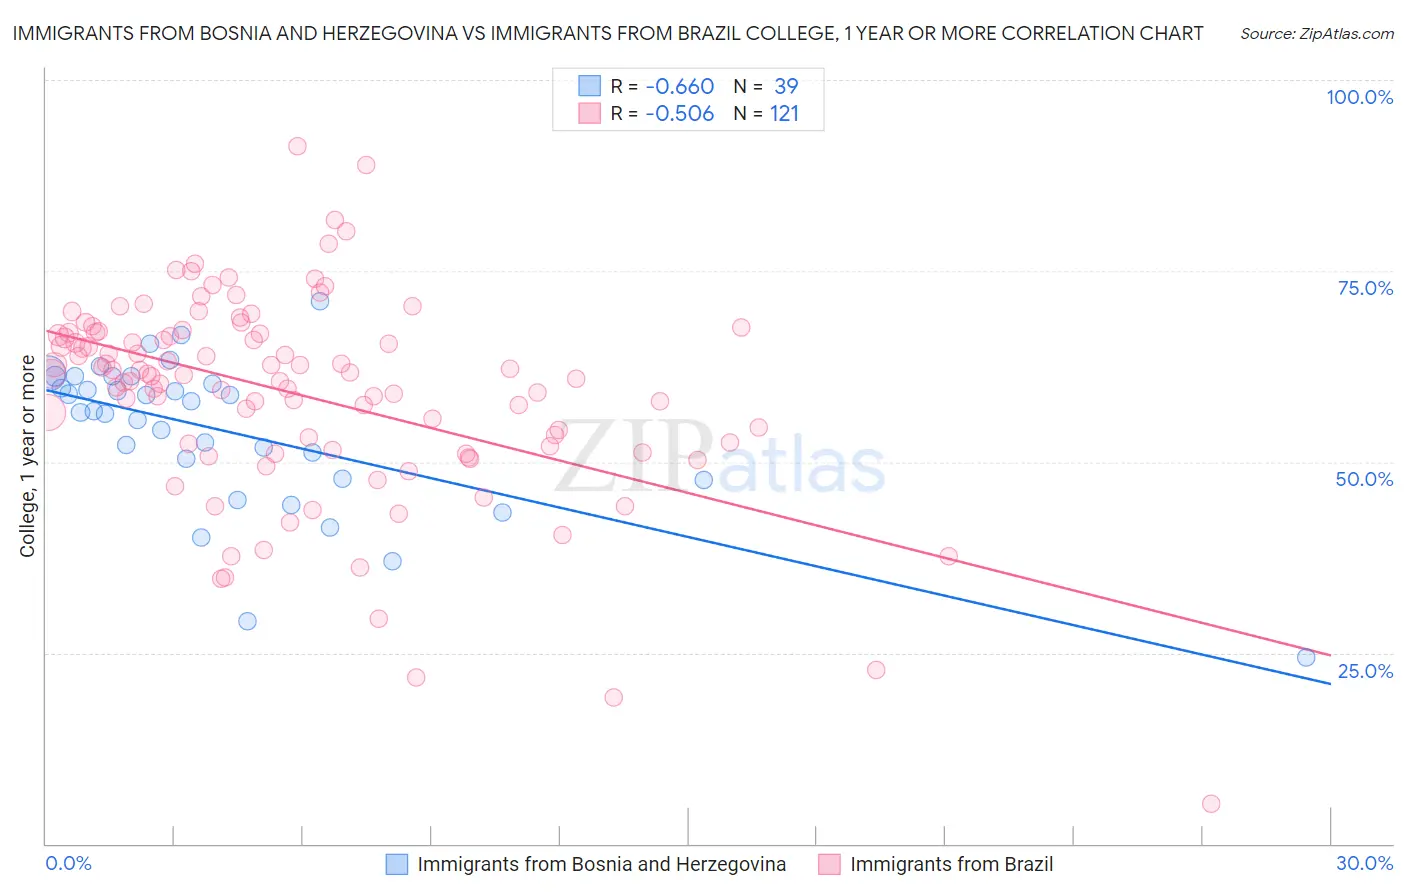 Immigrants from Bosnia and Herzegovina vs Immigrants from Brazil College, 1 year or more